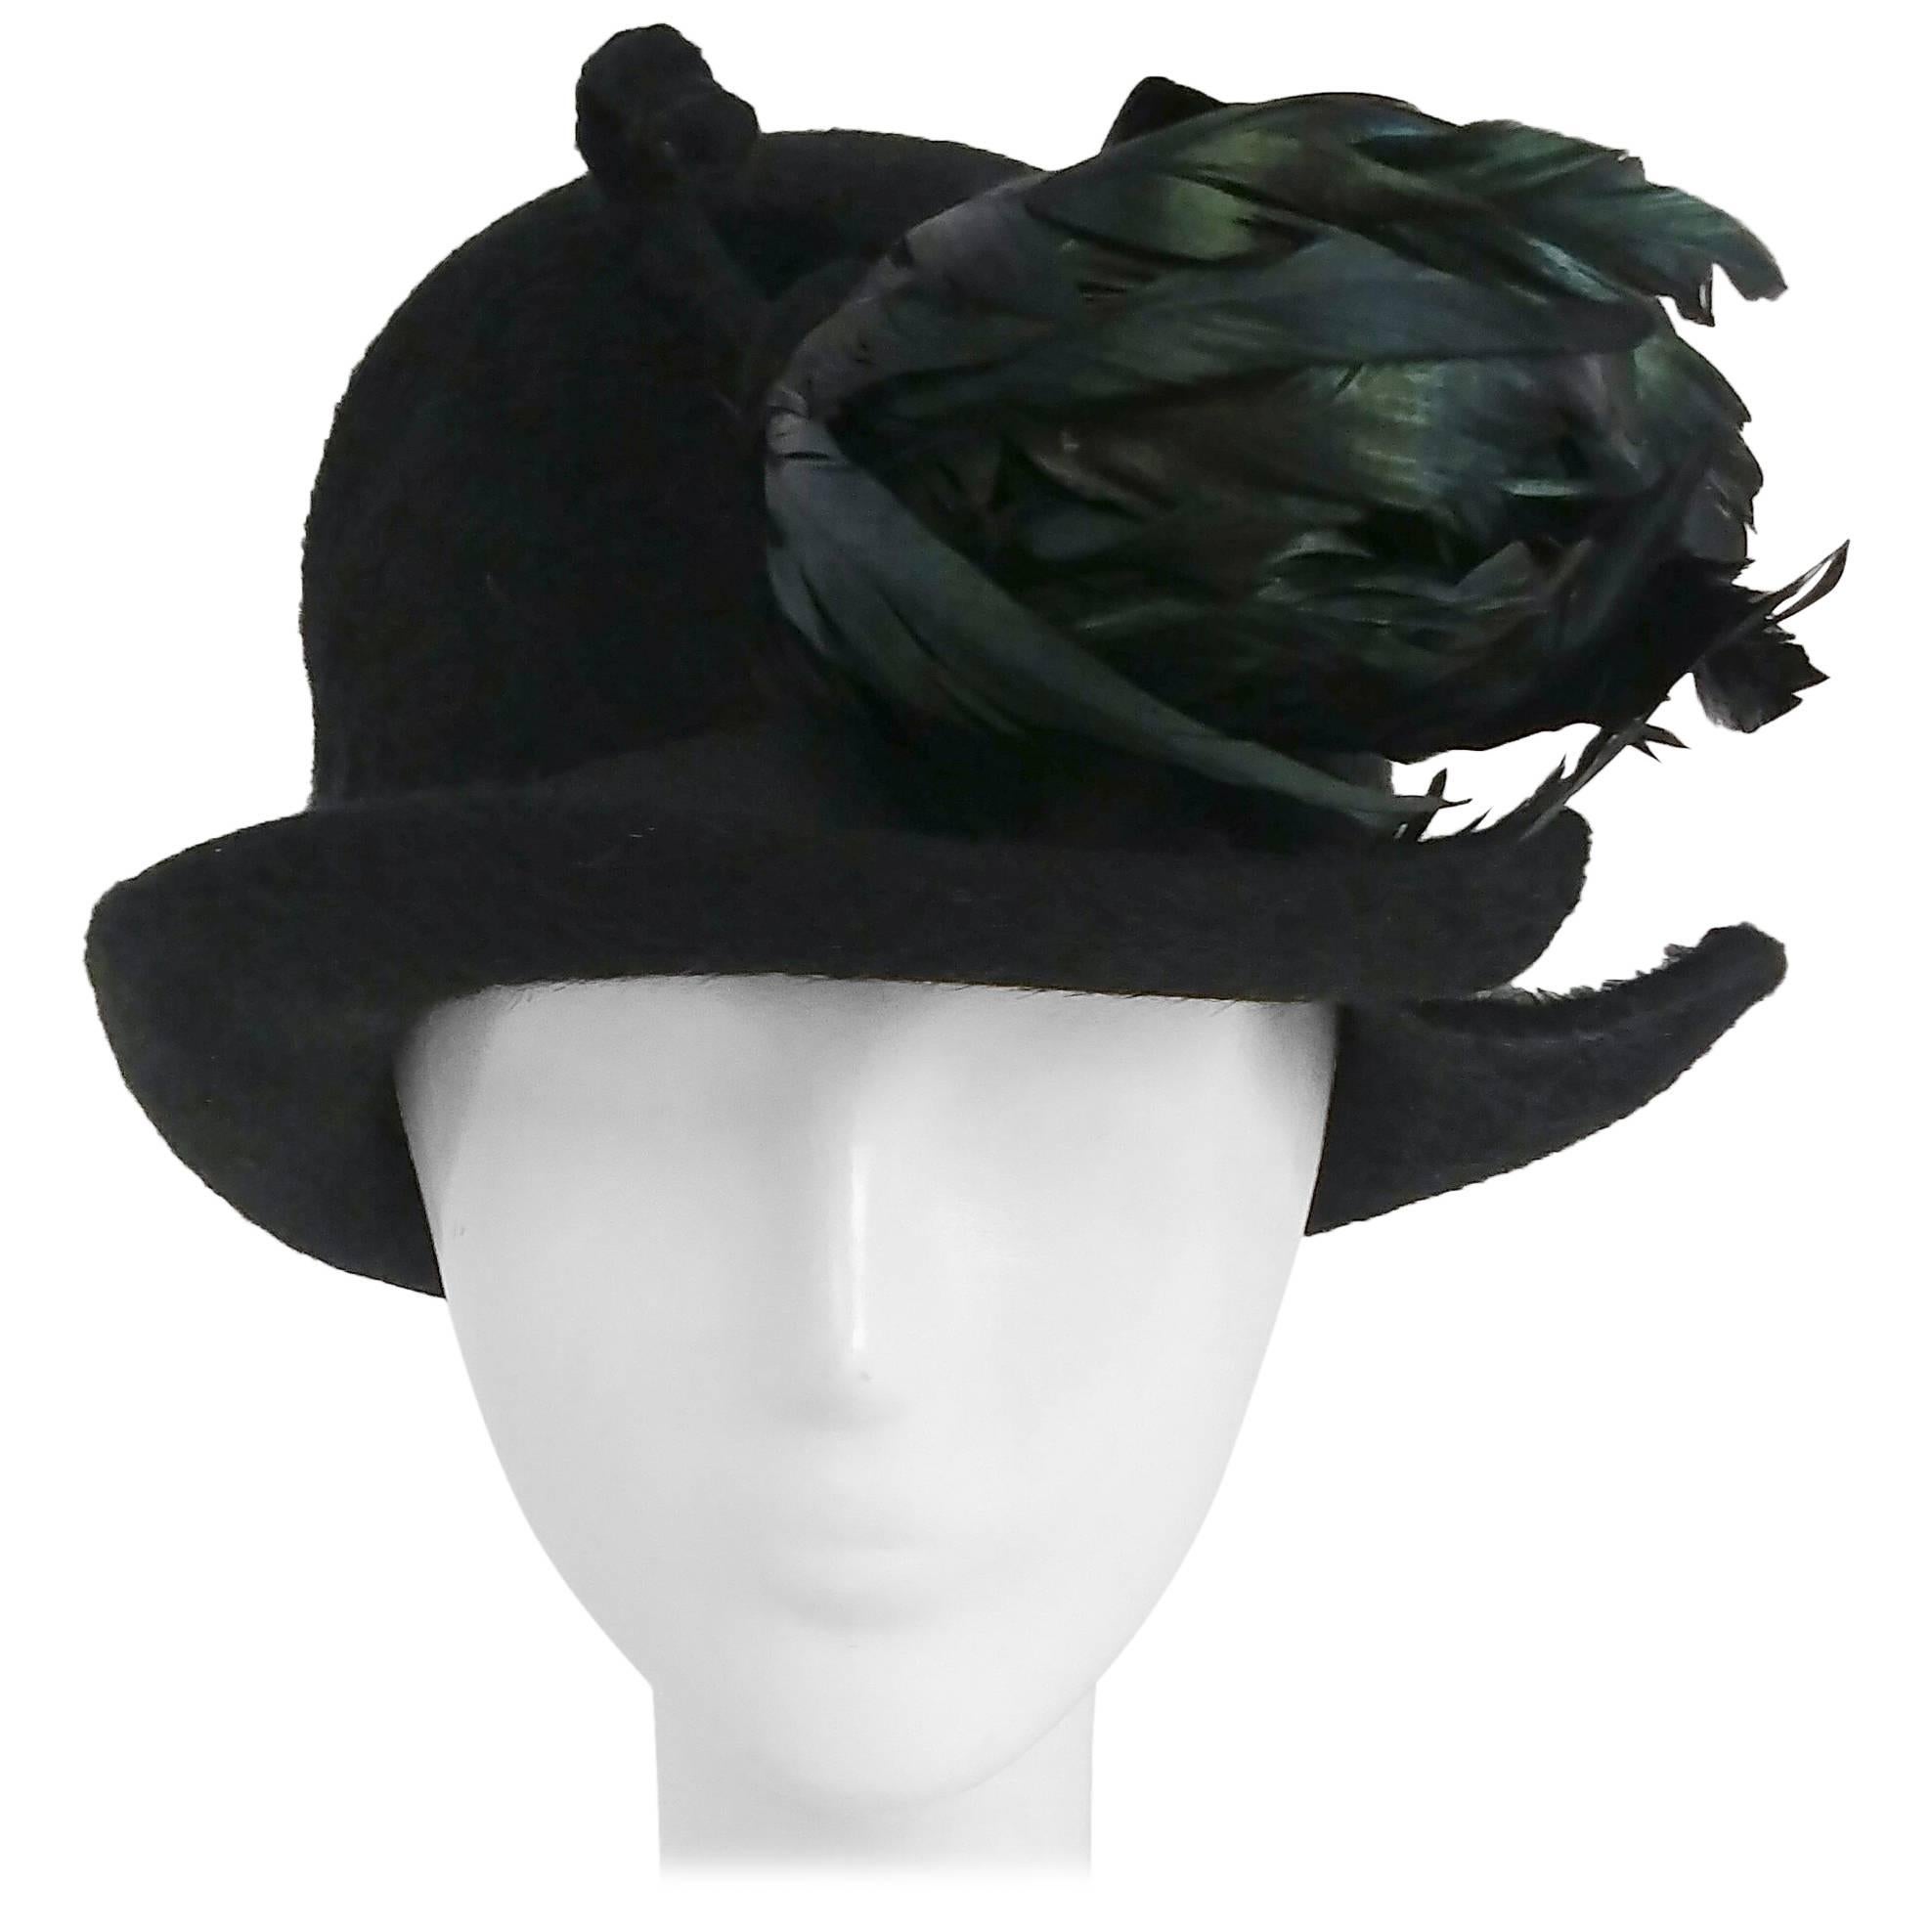 1960s Fur Felt Cloche Hat w/ Rooster Feathers